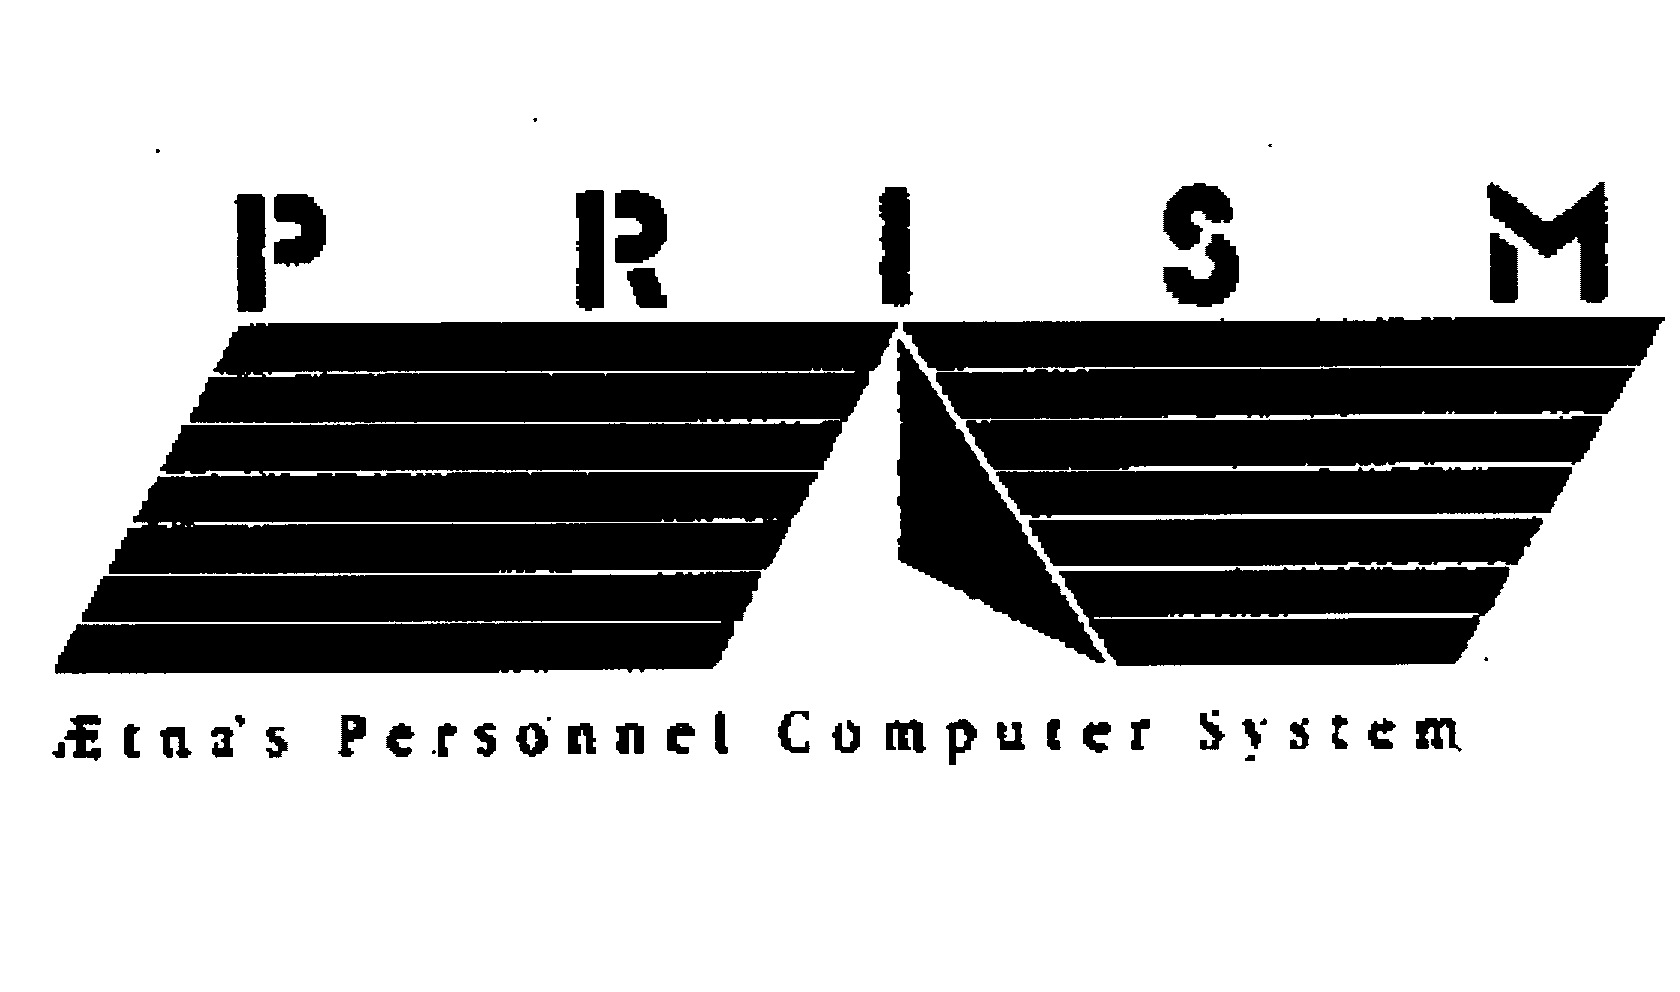  PRISM AETNA'S PERSONNEL COMPUTER SYSTEM